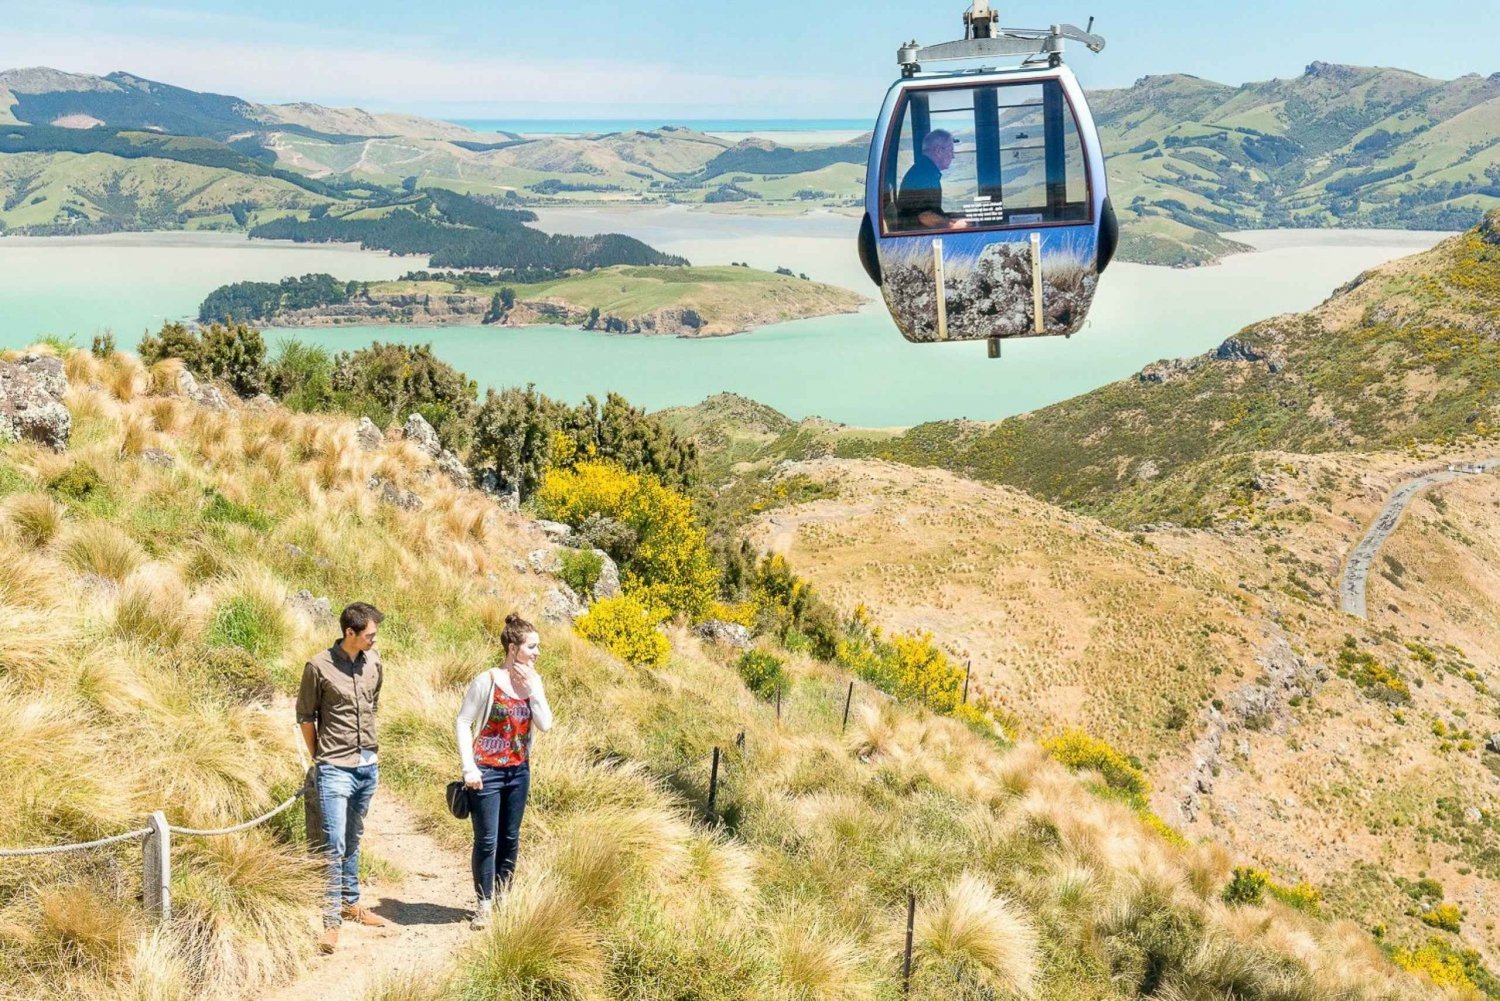 Best Attractions in Christchurch